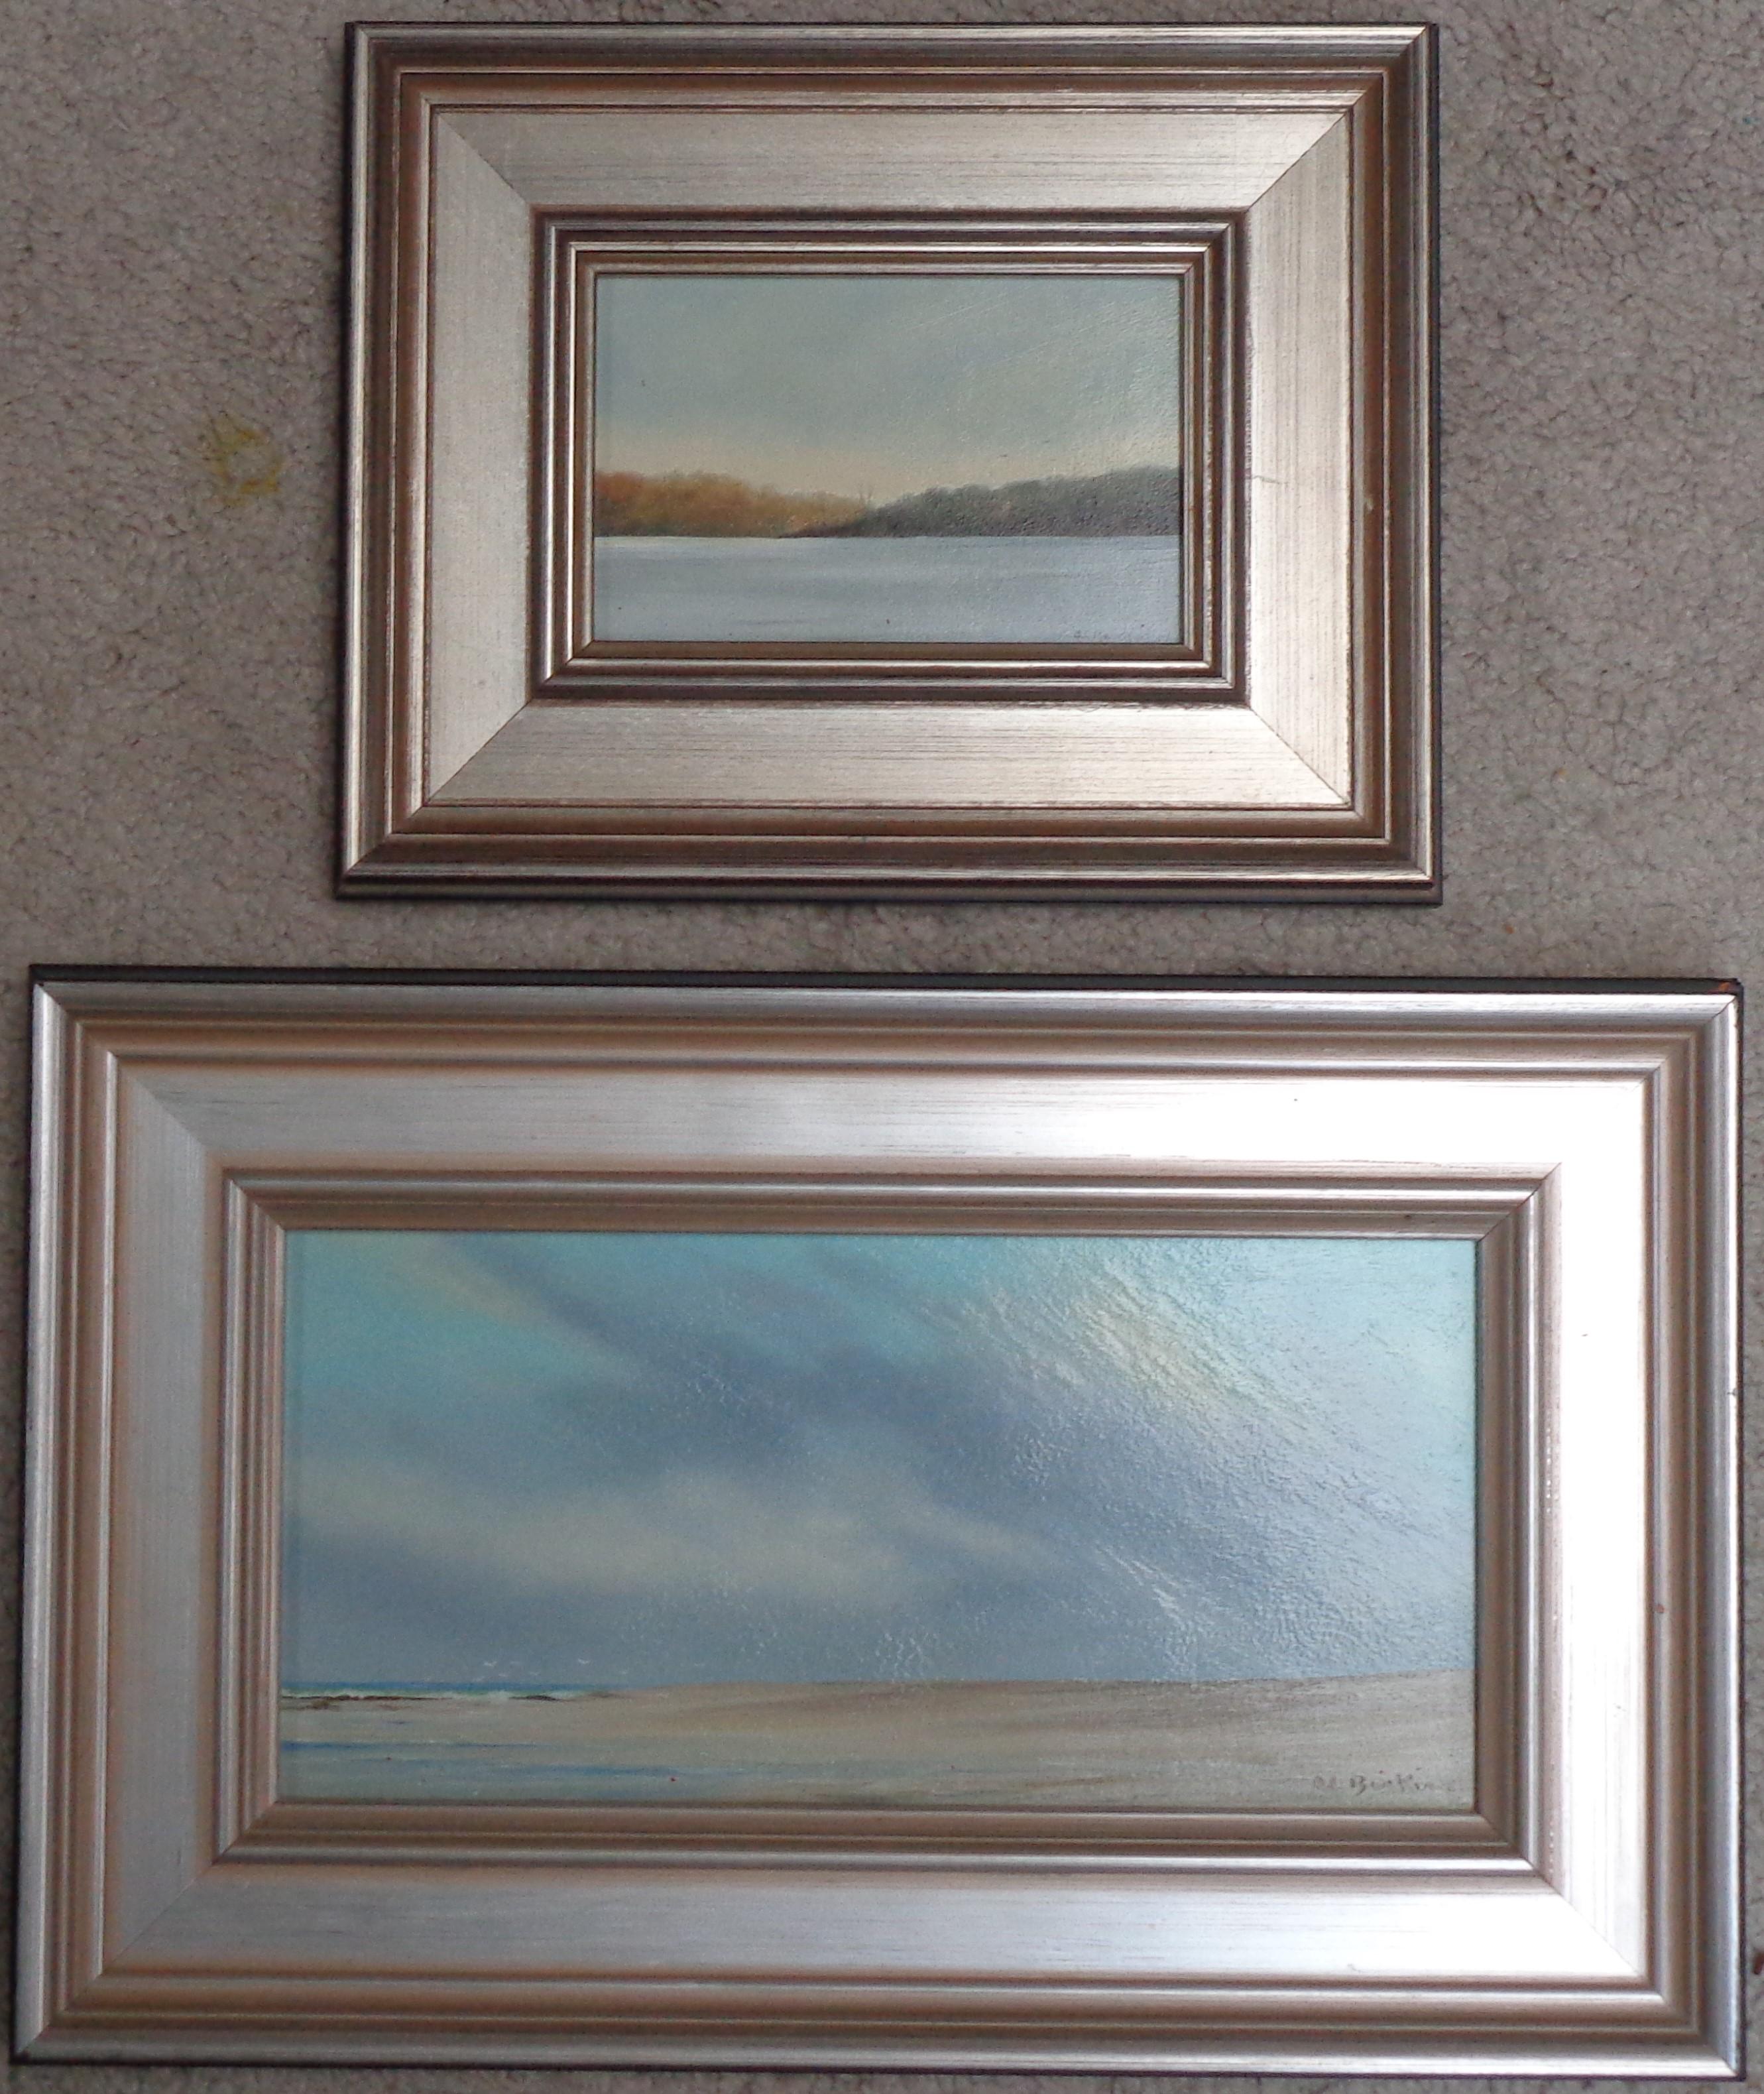   Contemporary Traditional Pair of Landscape Seascape Paintings Al Barker  For Sale 2